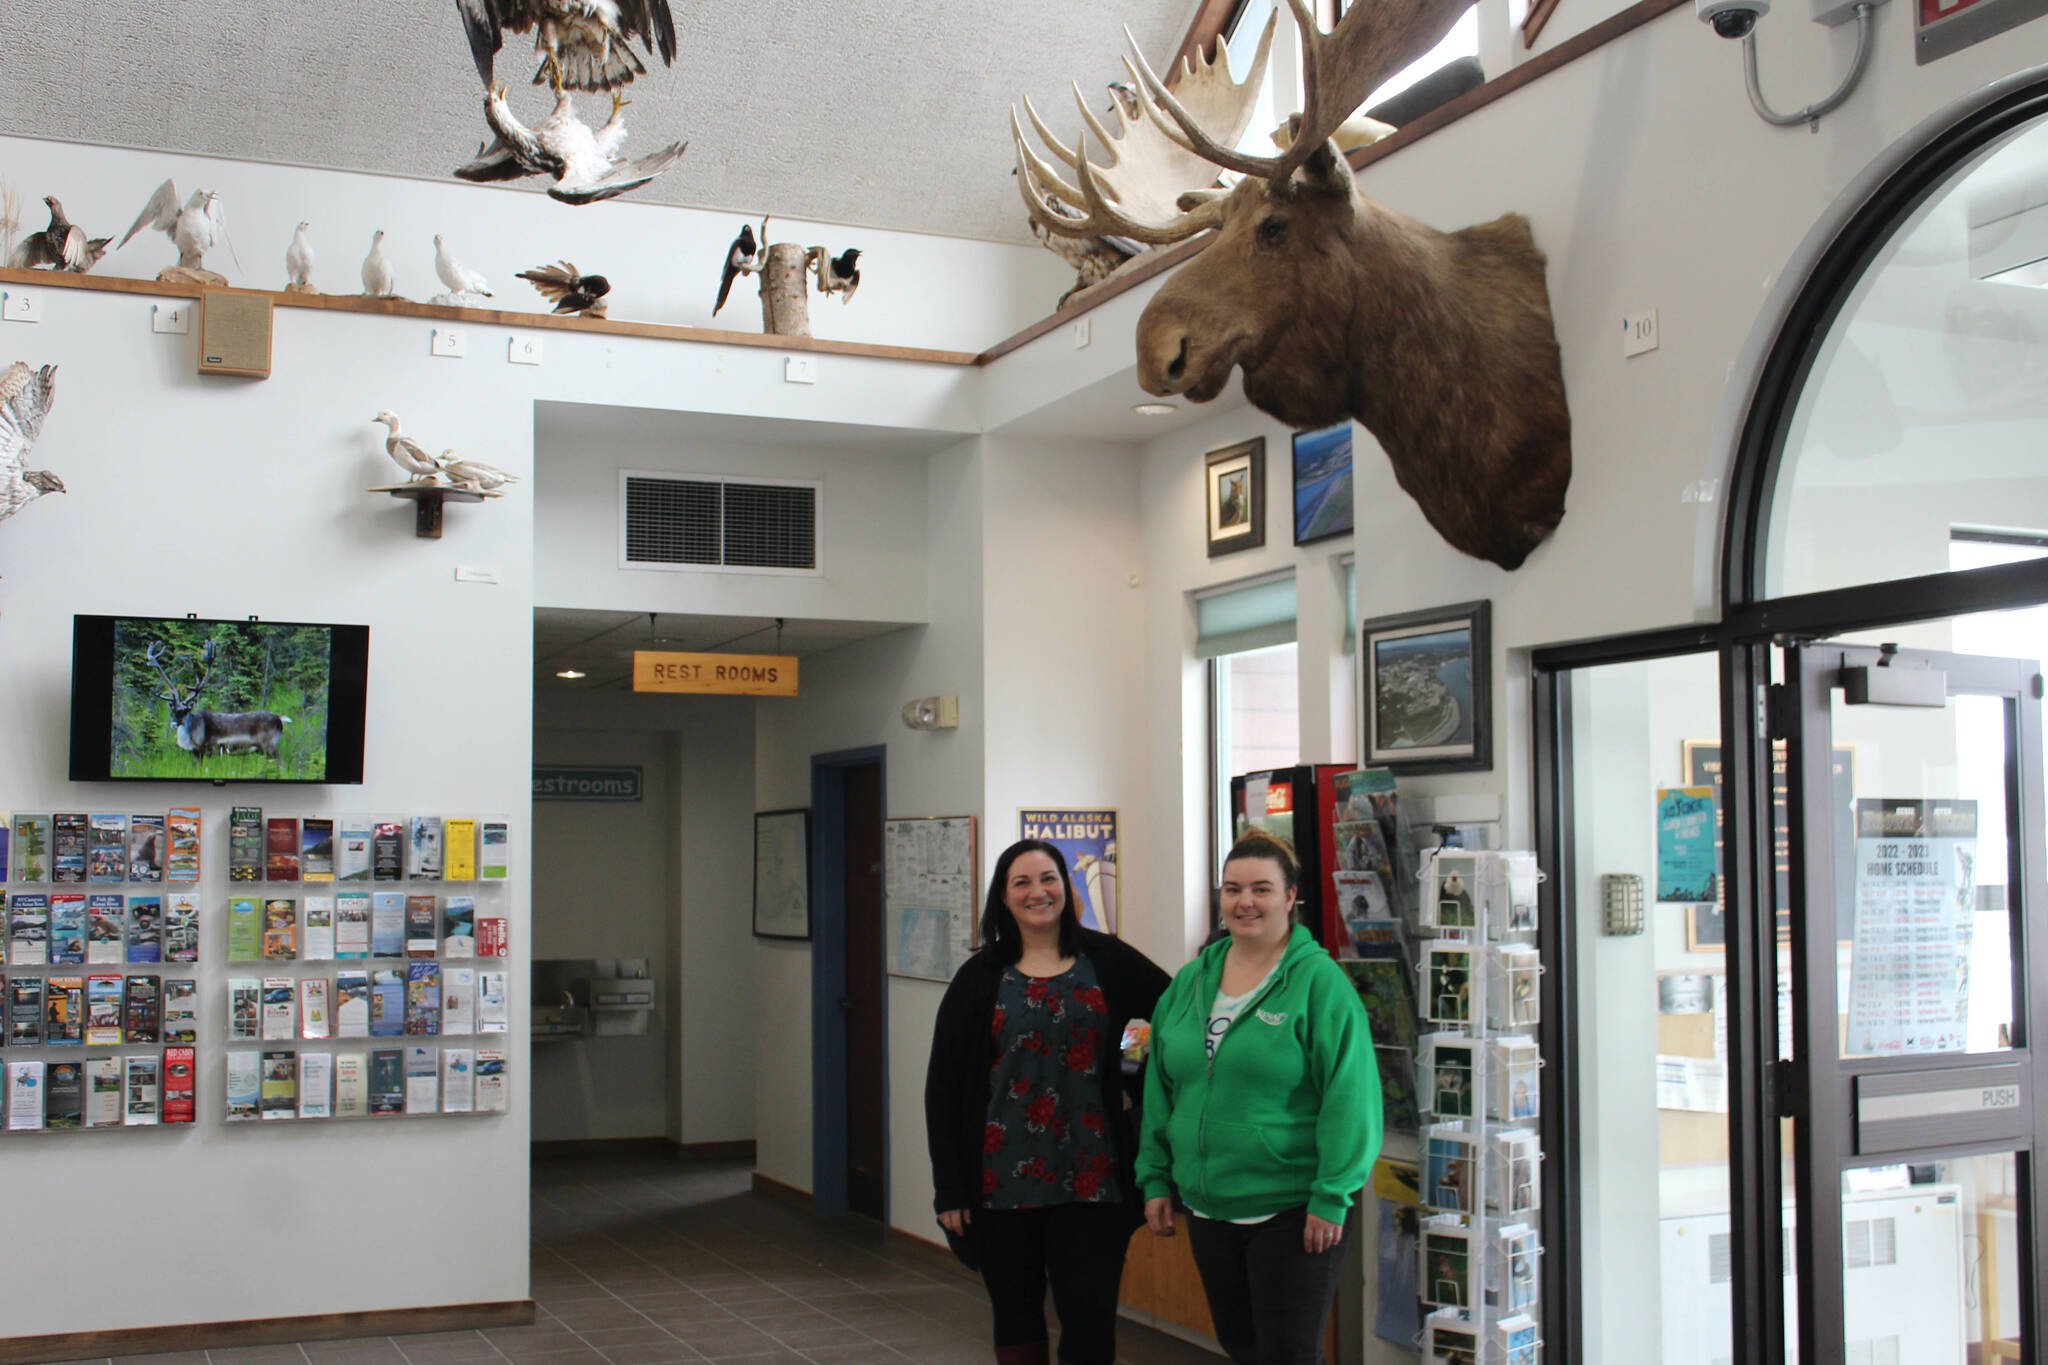 Samantha Springer, left, and Michelle Walker stand in the lobby of the Kenai Chamber of Commerce and Visitor Center on Wednesday, March 22, 2023, in Kenai, Alaska. (Ashlyn O’Hara/Peninsula Clarion)